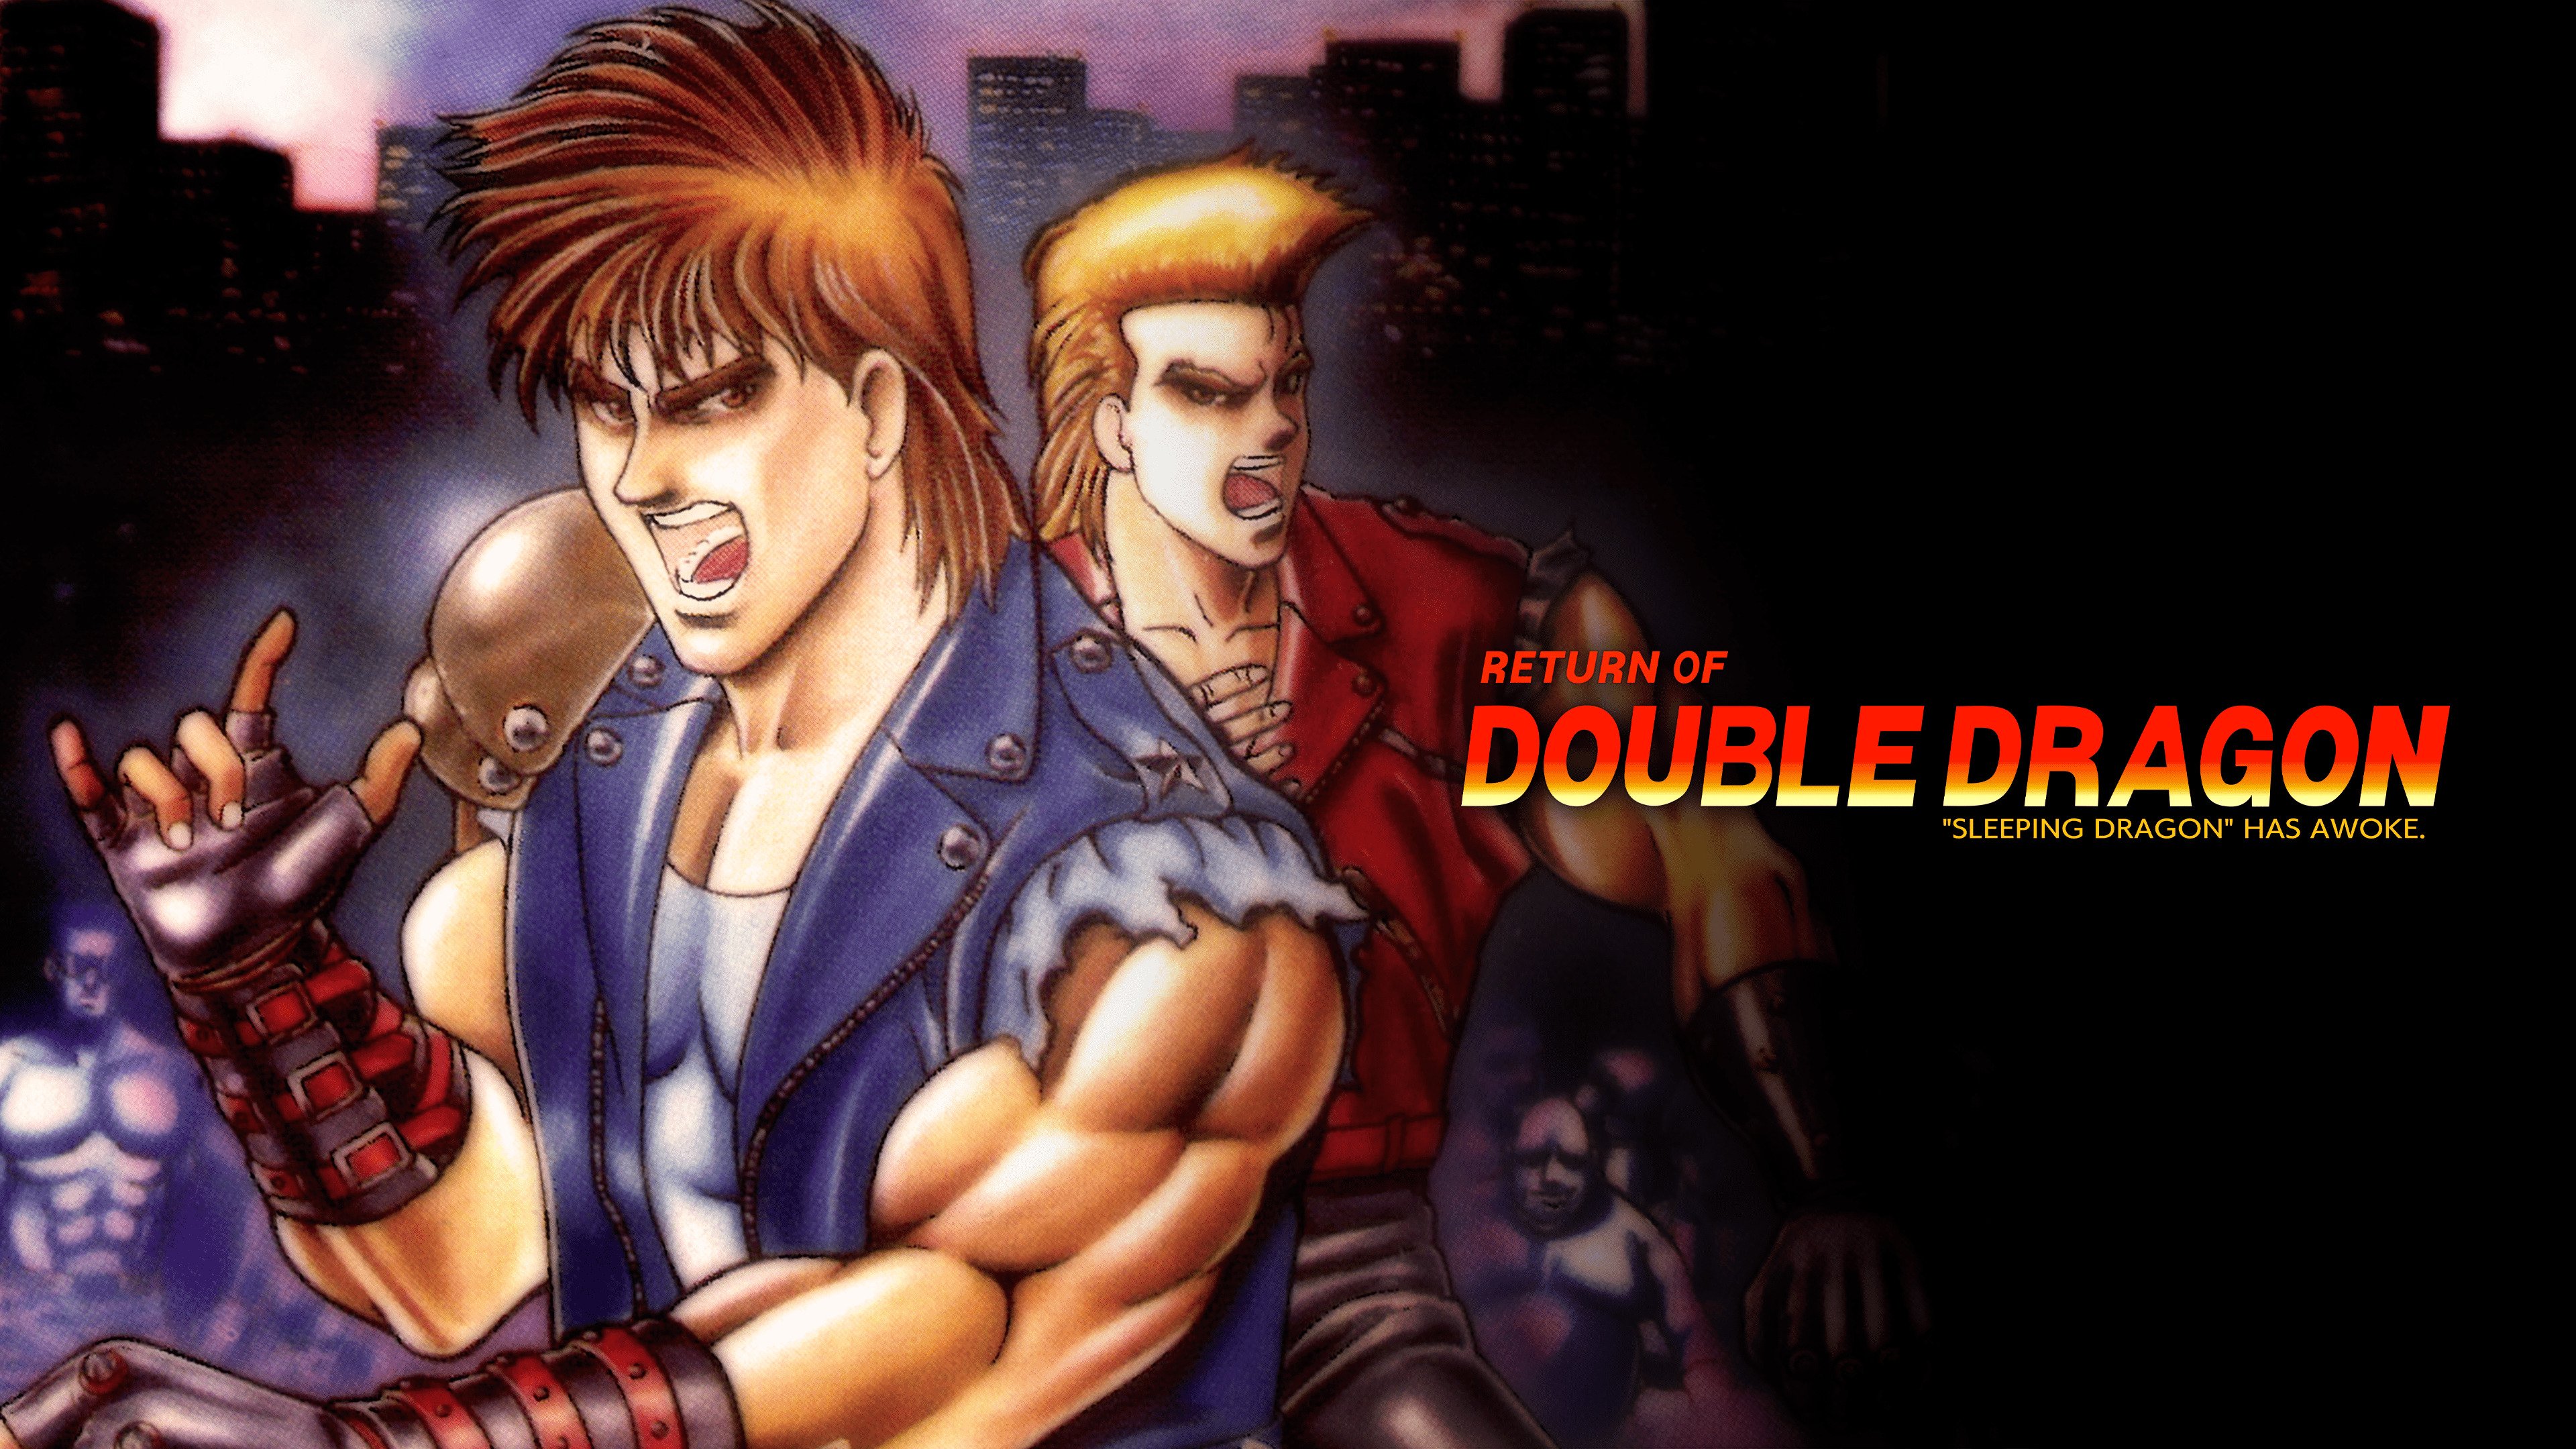 Double Dragon Collection trailer takes us on a six-pack bruise